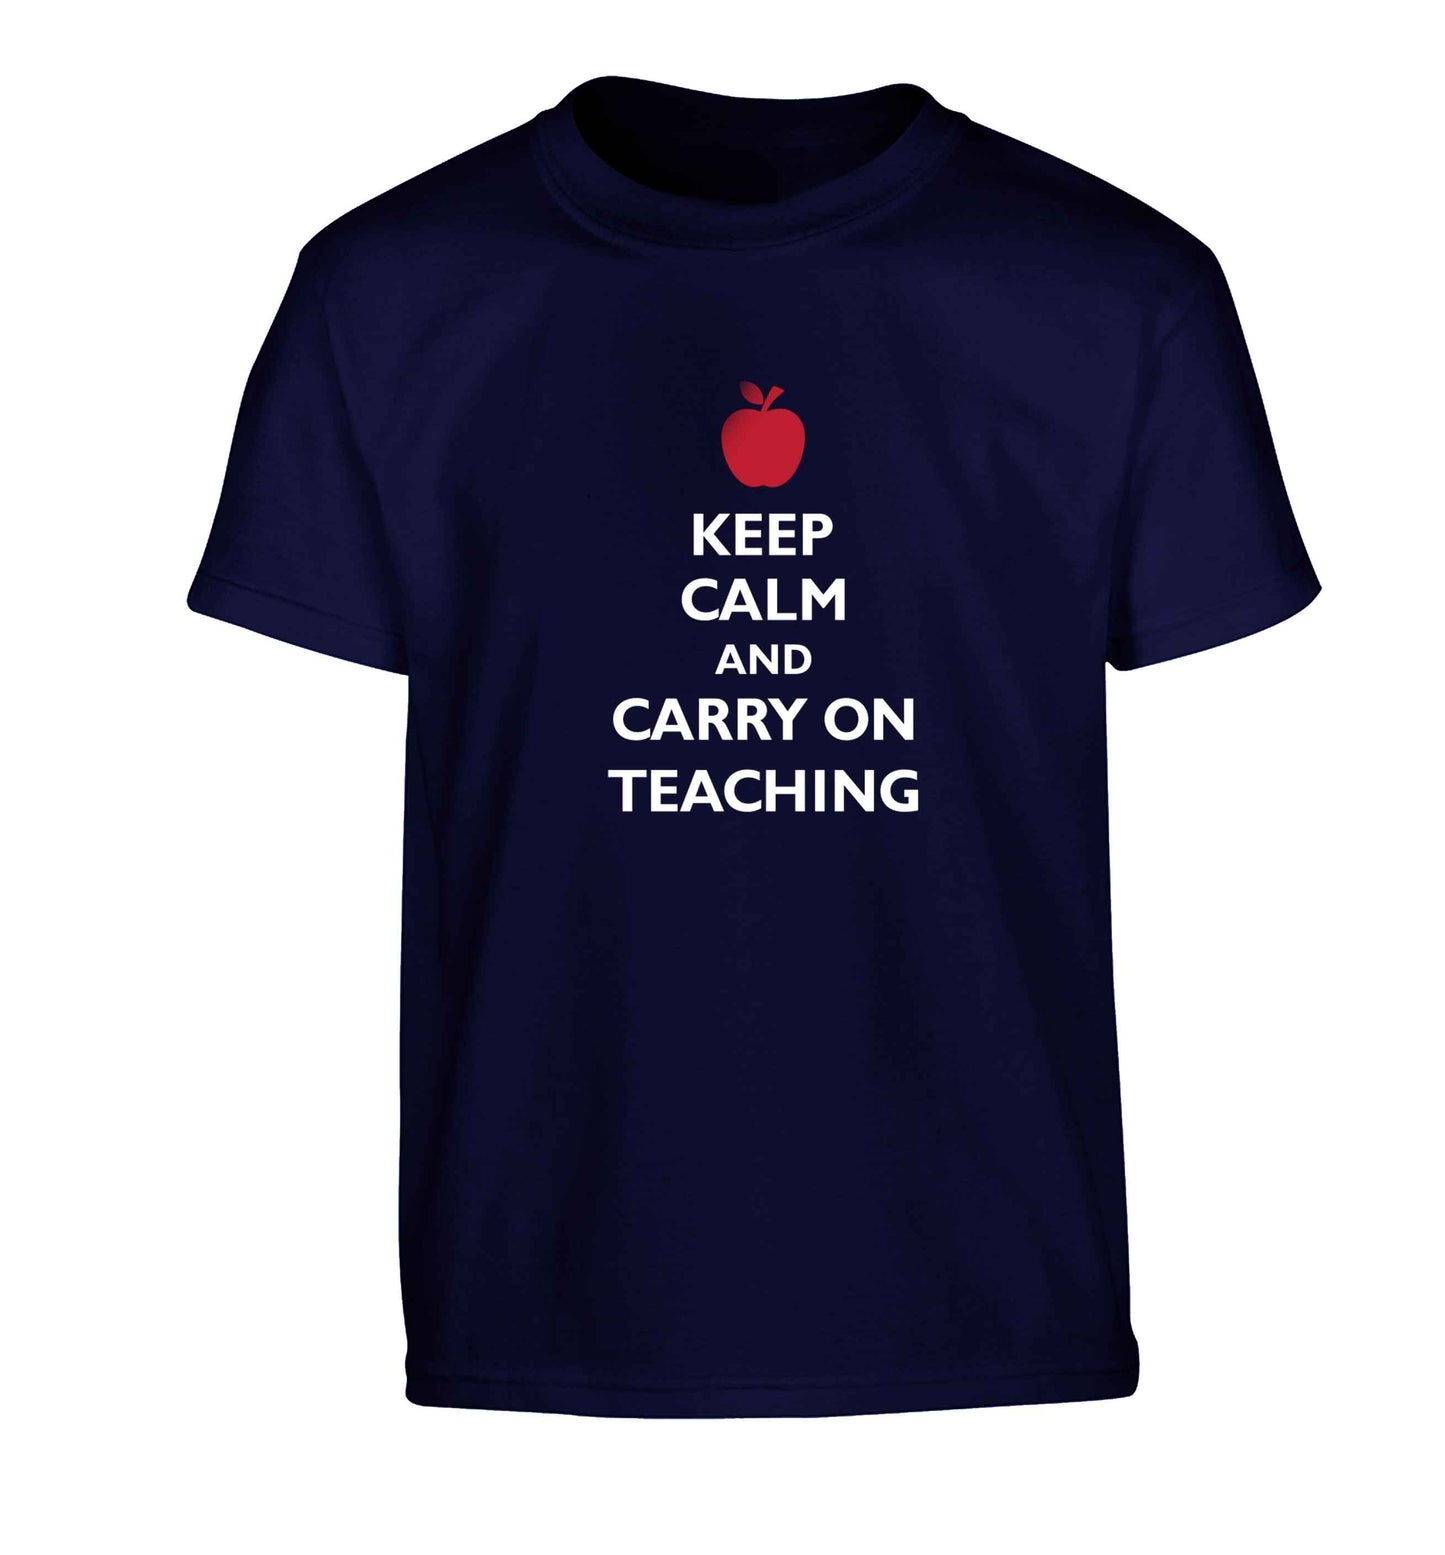 Keep calm and carry on teaching Children's navy Tshirt 12-13 Years